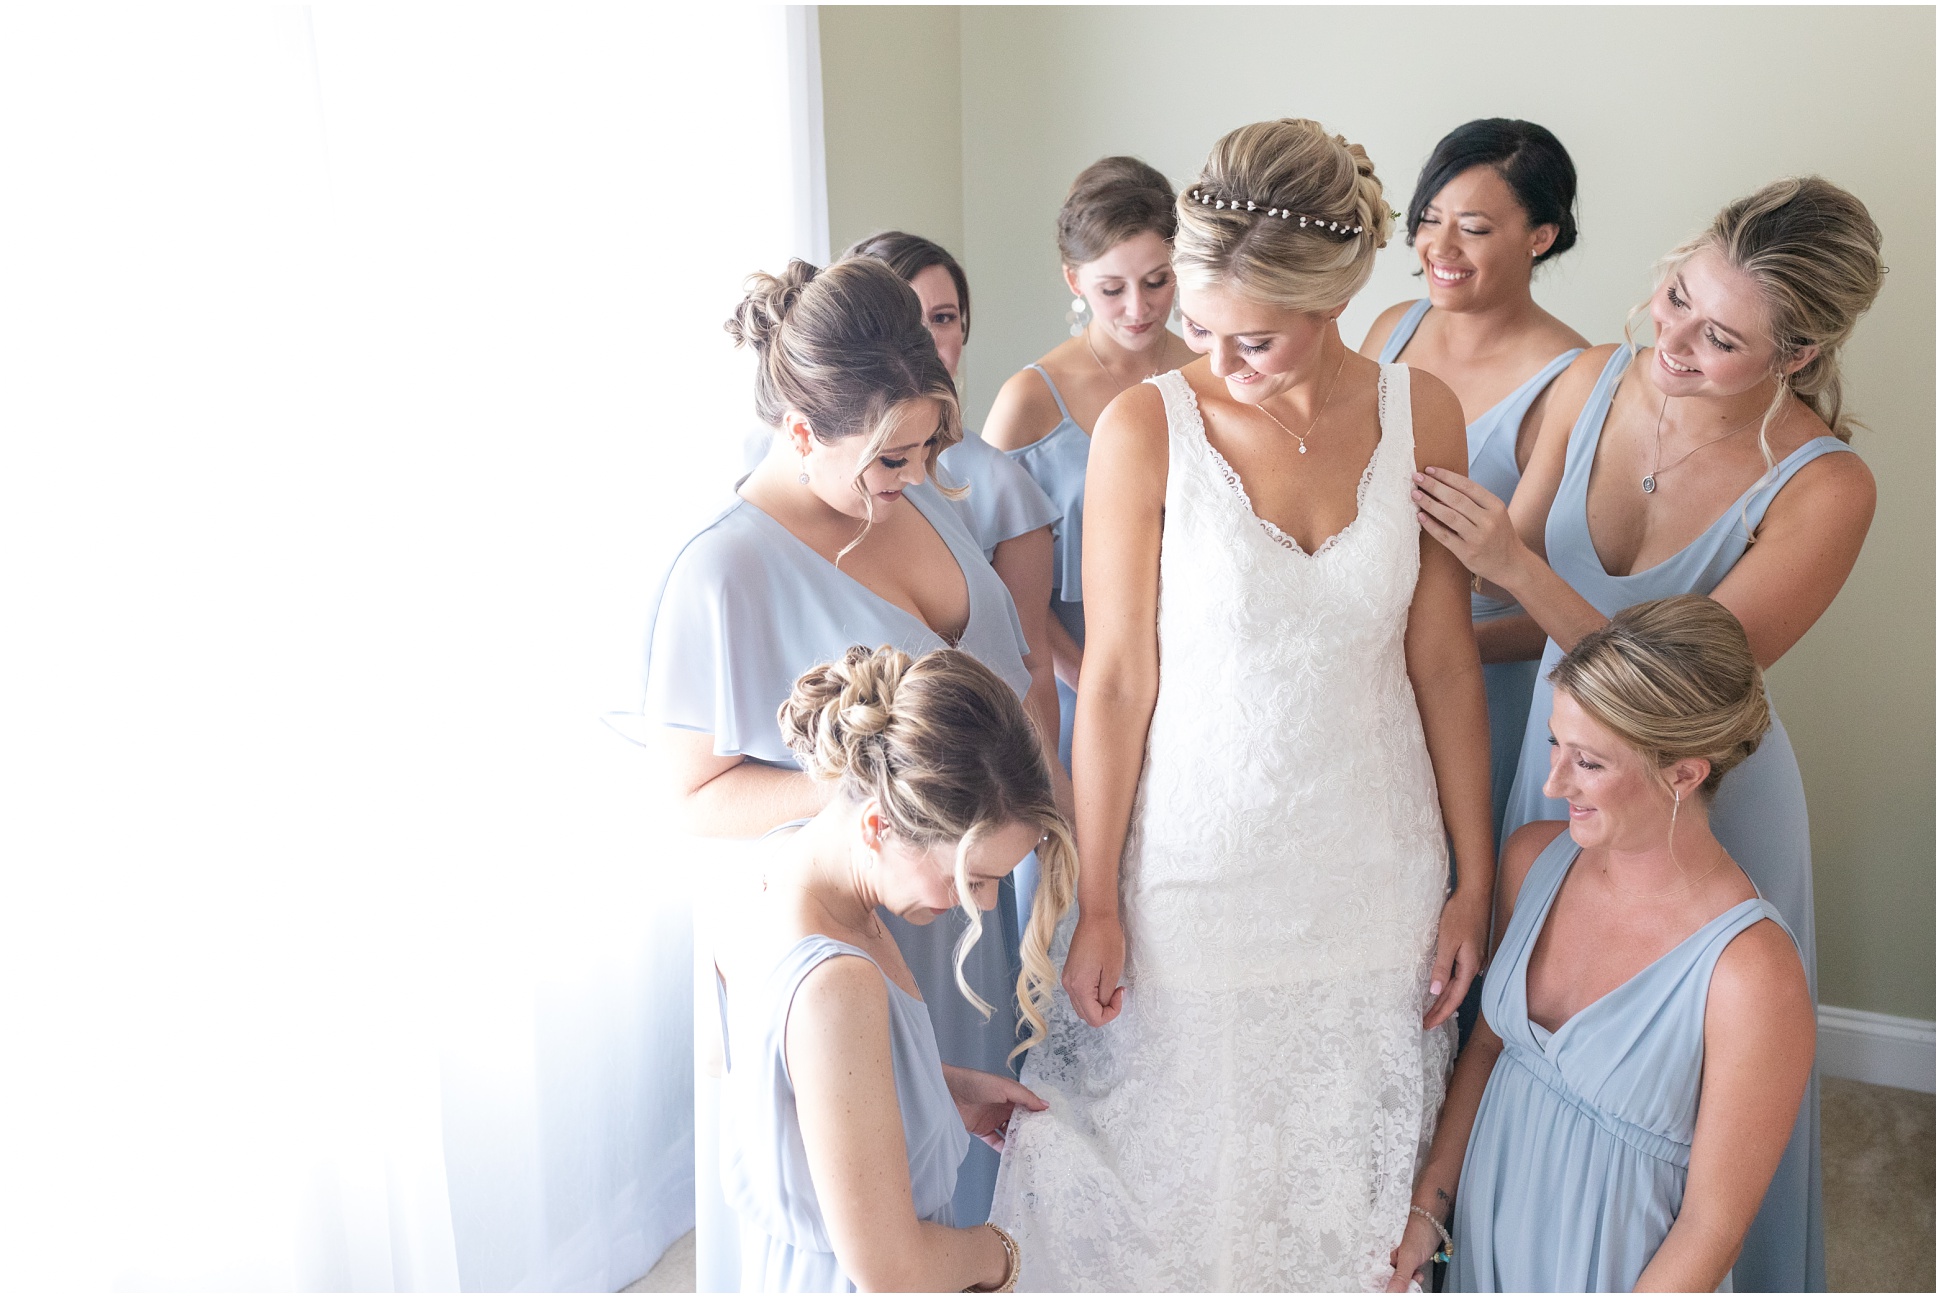 Bridesmaids helping bride with dress